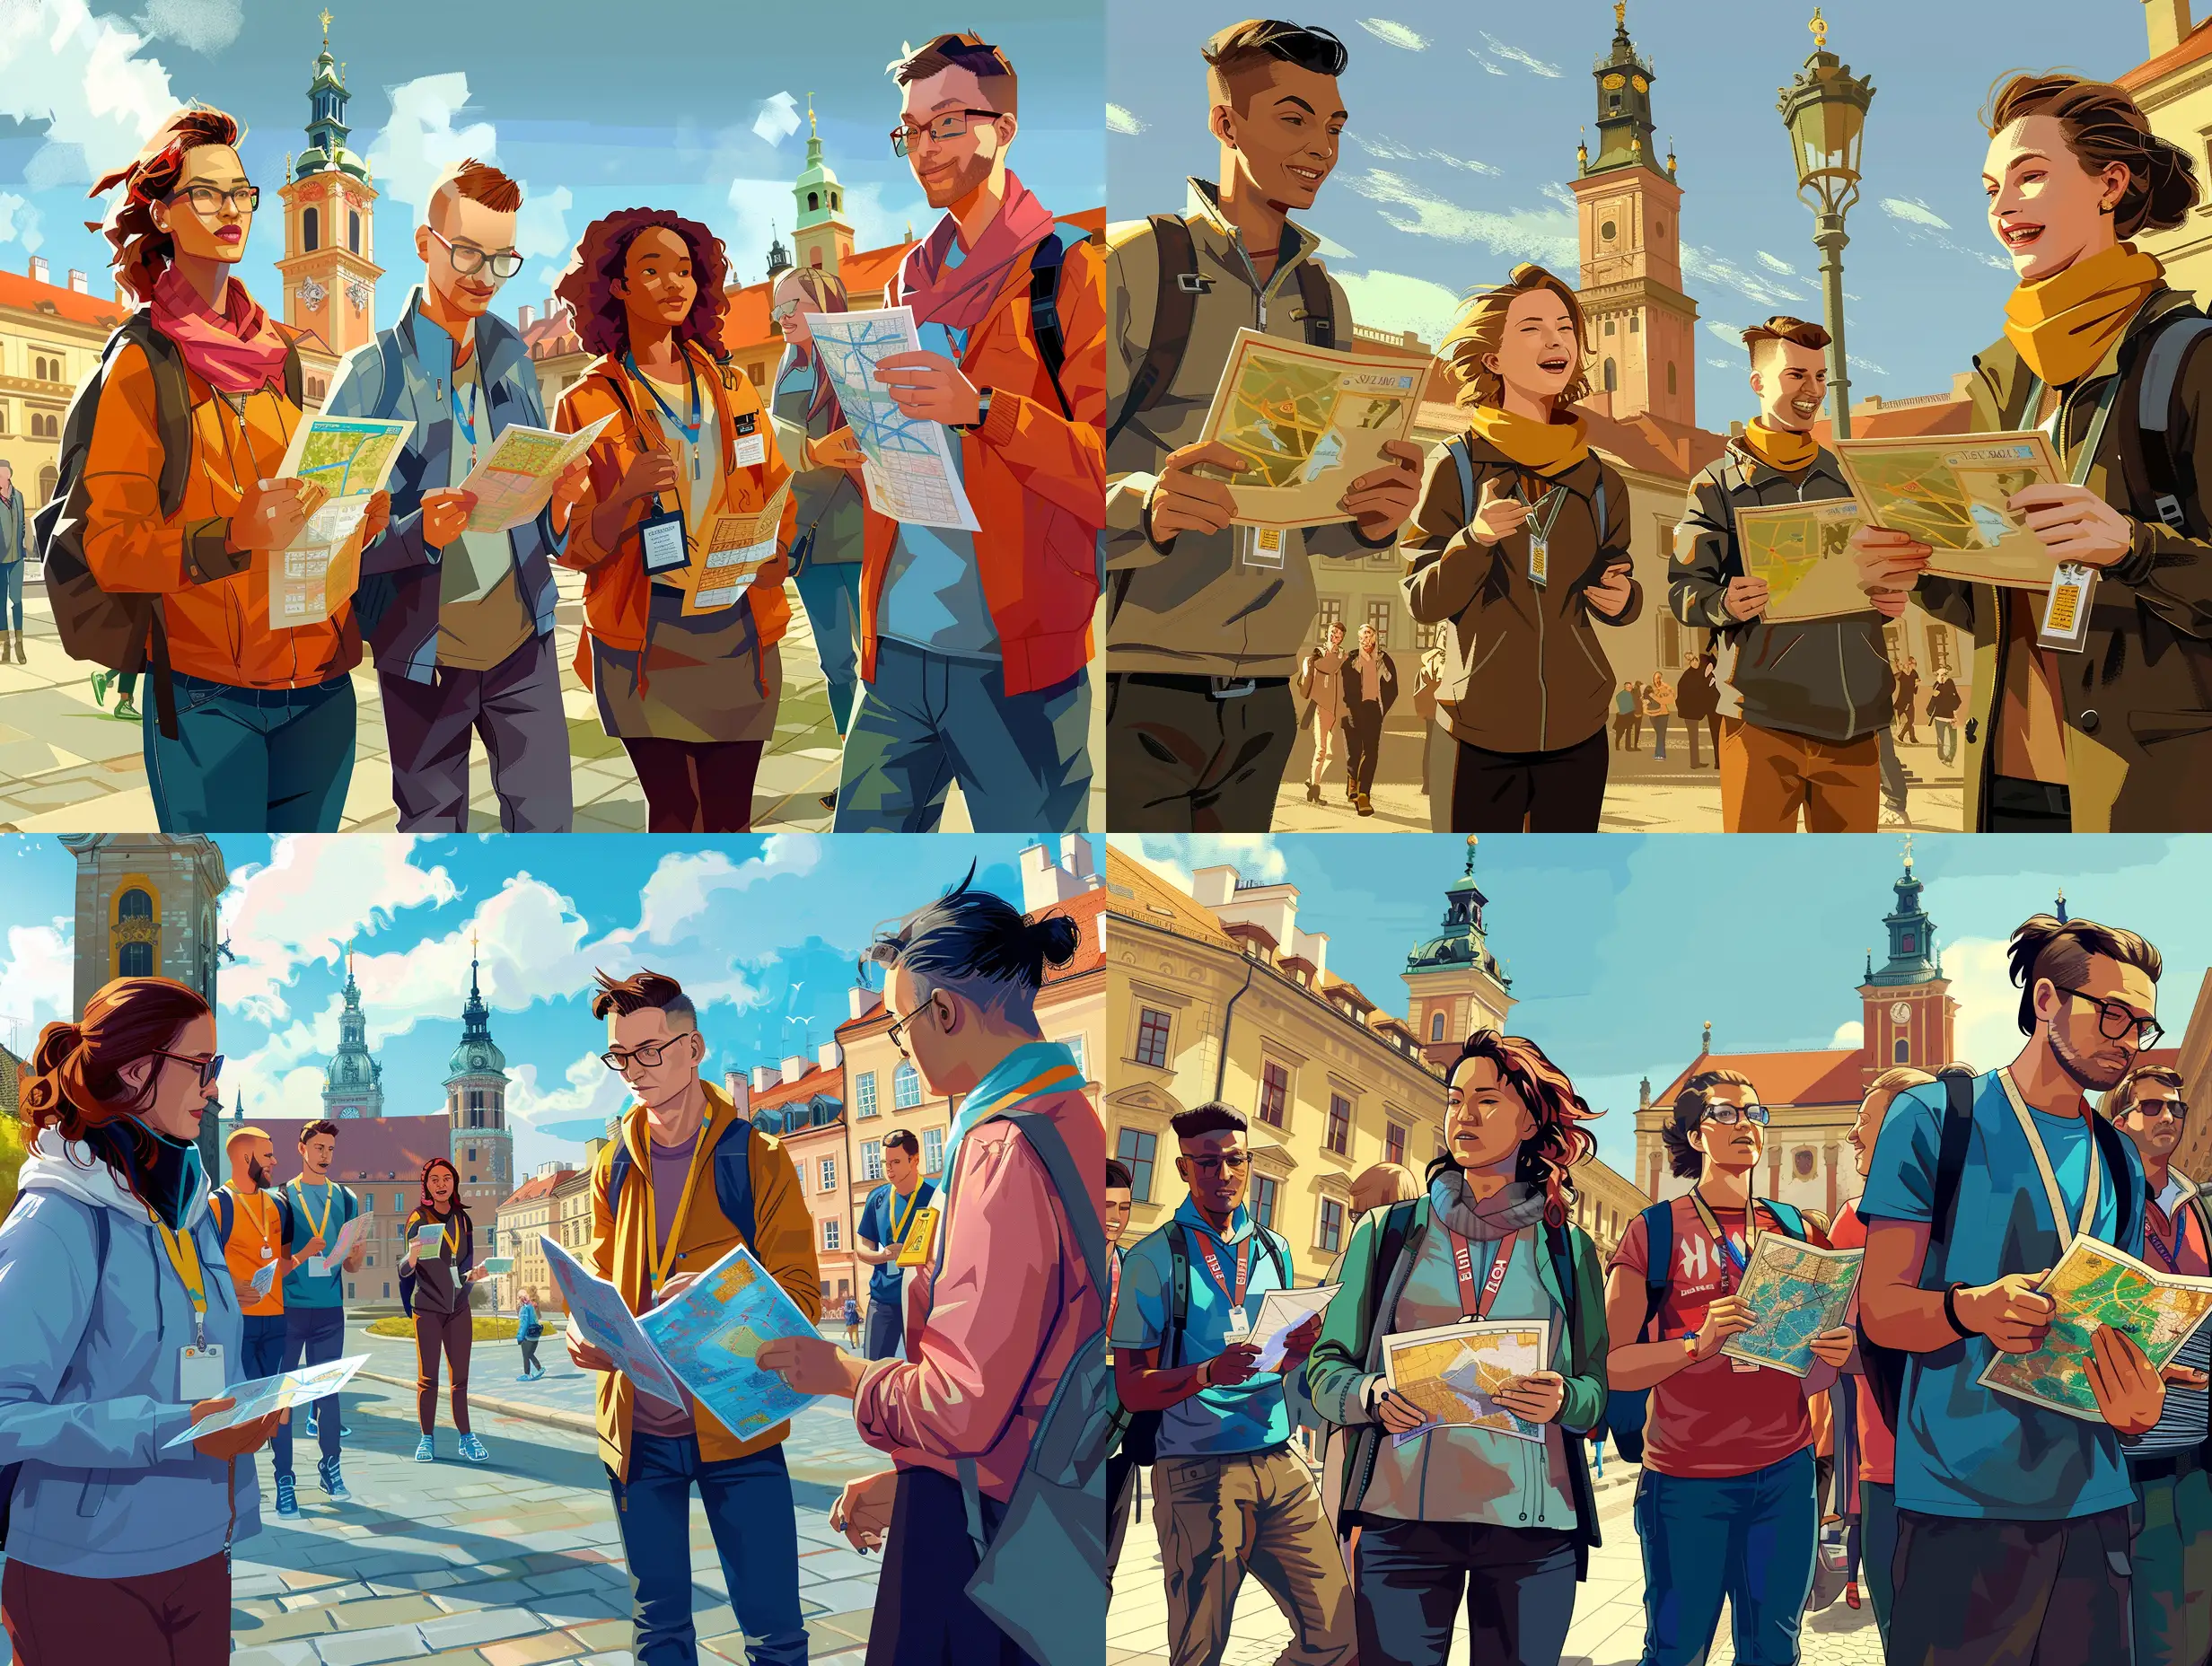 "Create an image that showcases a diverse group of people engaging in a city-wide treasure hunt in the historic and vibrant streets of Warsaw. The image should capture the excitement and teamwork of an urban game, with participants holding maps and interacting with landmarks. Include elements that suggest a corporate team-building event, such as matching team scarves or badges. The setting should be during the day with clear weather, and the architecture should reflect the unique character of Warsaw. The composition should convey a sense of adventure, collaboration, and discovery.